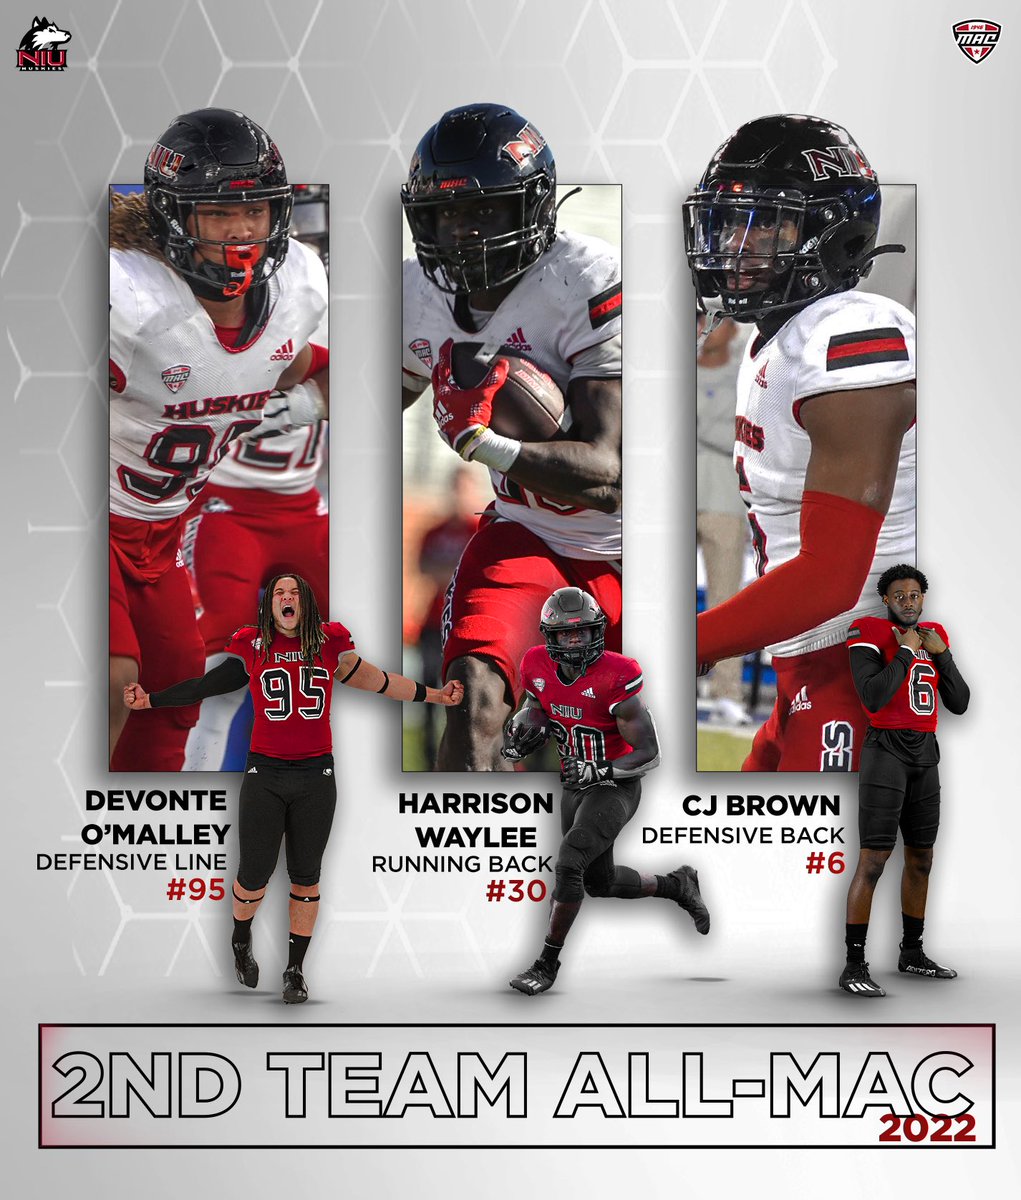 These DOGS were some of the best in the business this year!!🙌🏽 Congrats @DonVito_95 @hwaylee02 @cj_brown24 for being named 2nd Team All-MAC!!🥈 #TheHardWay | #AllConference